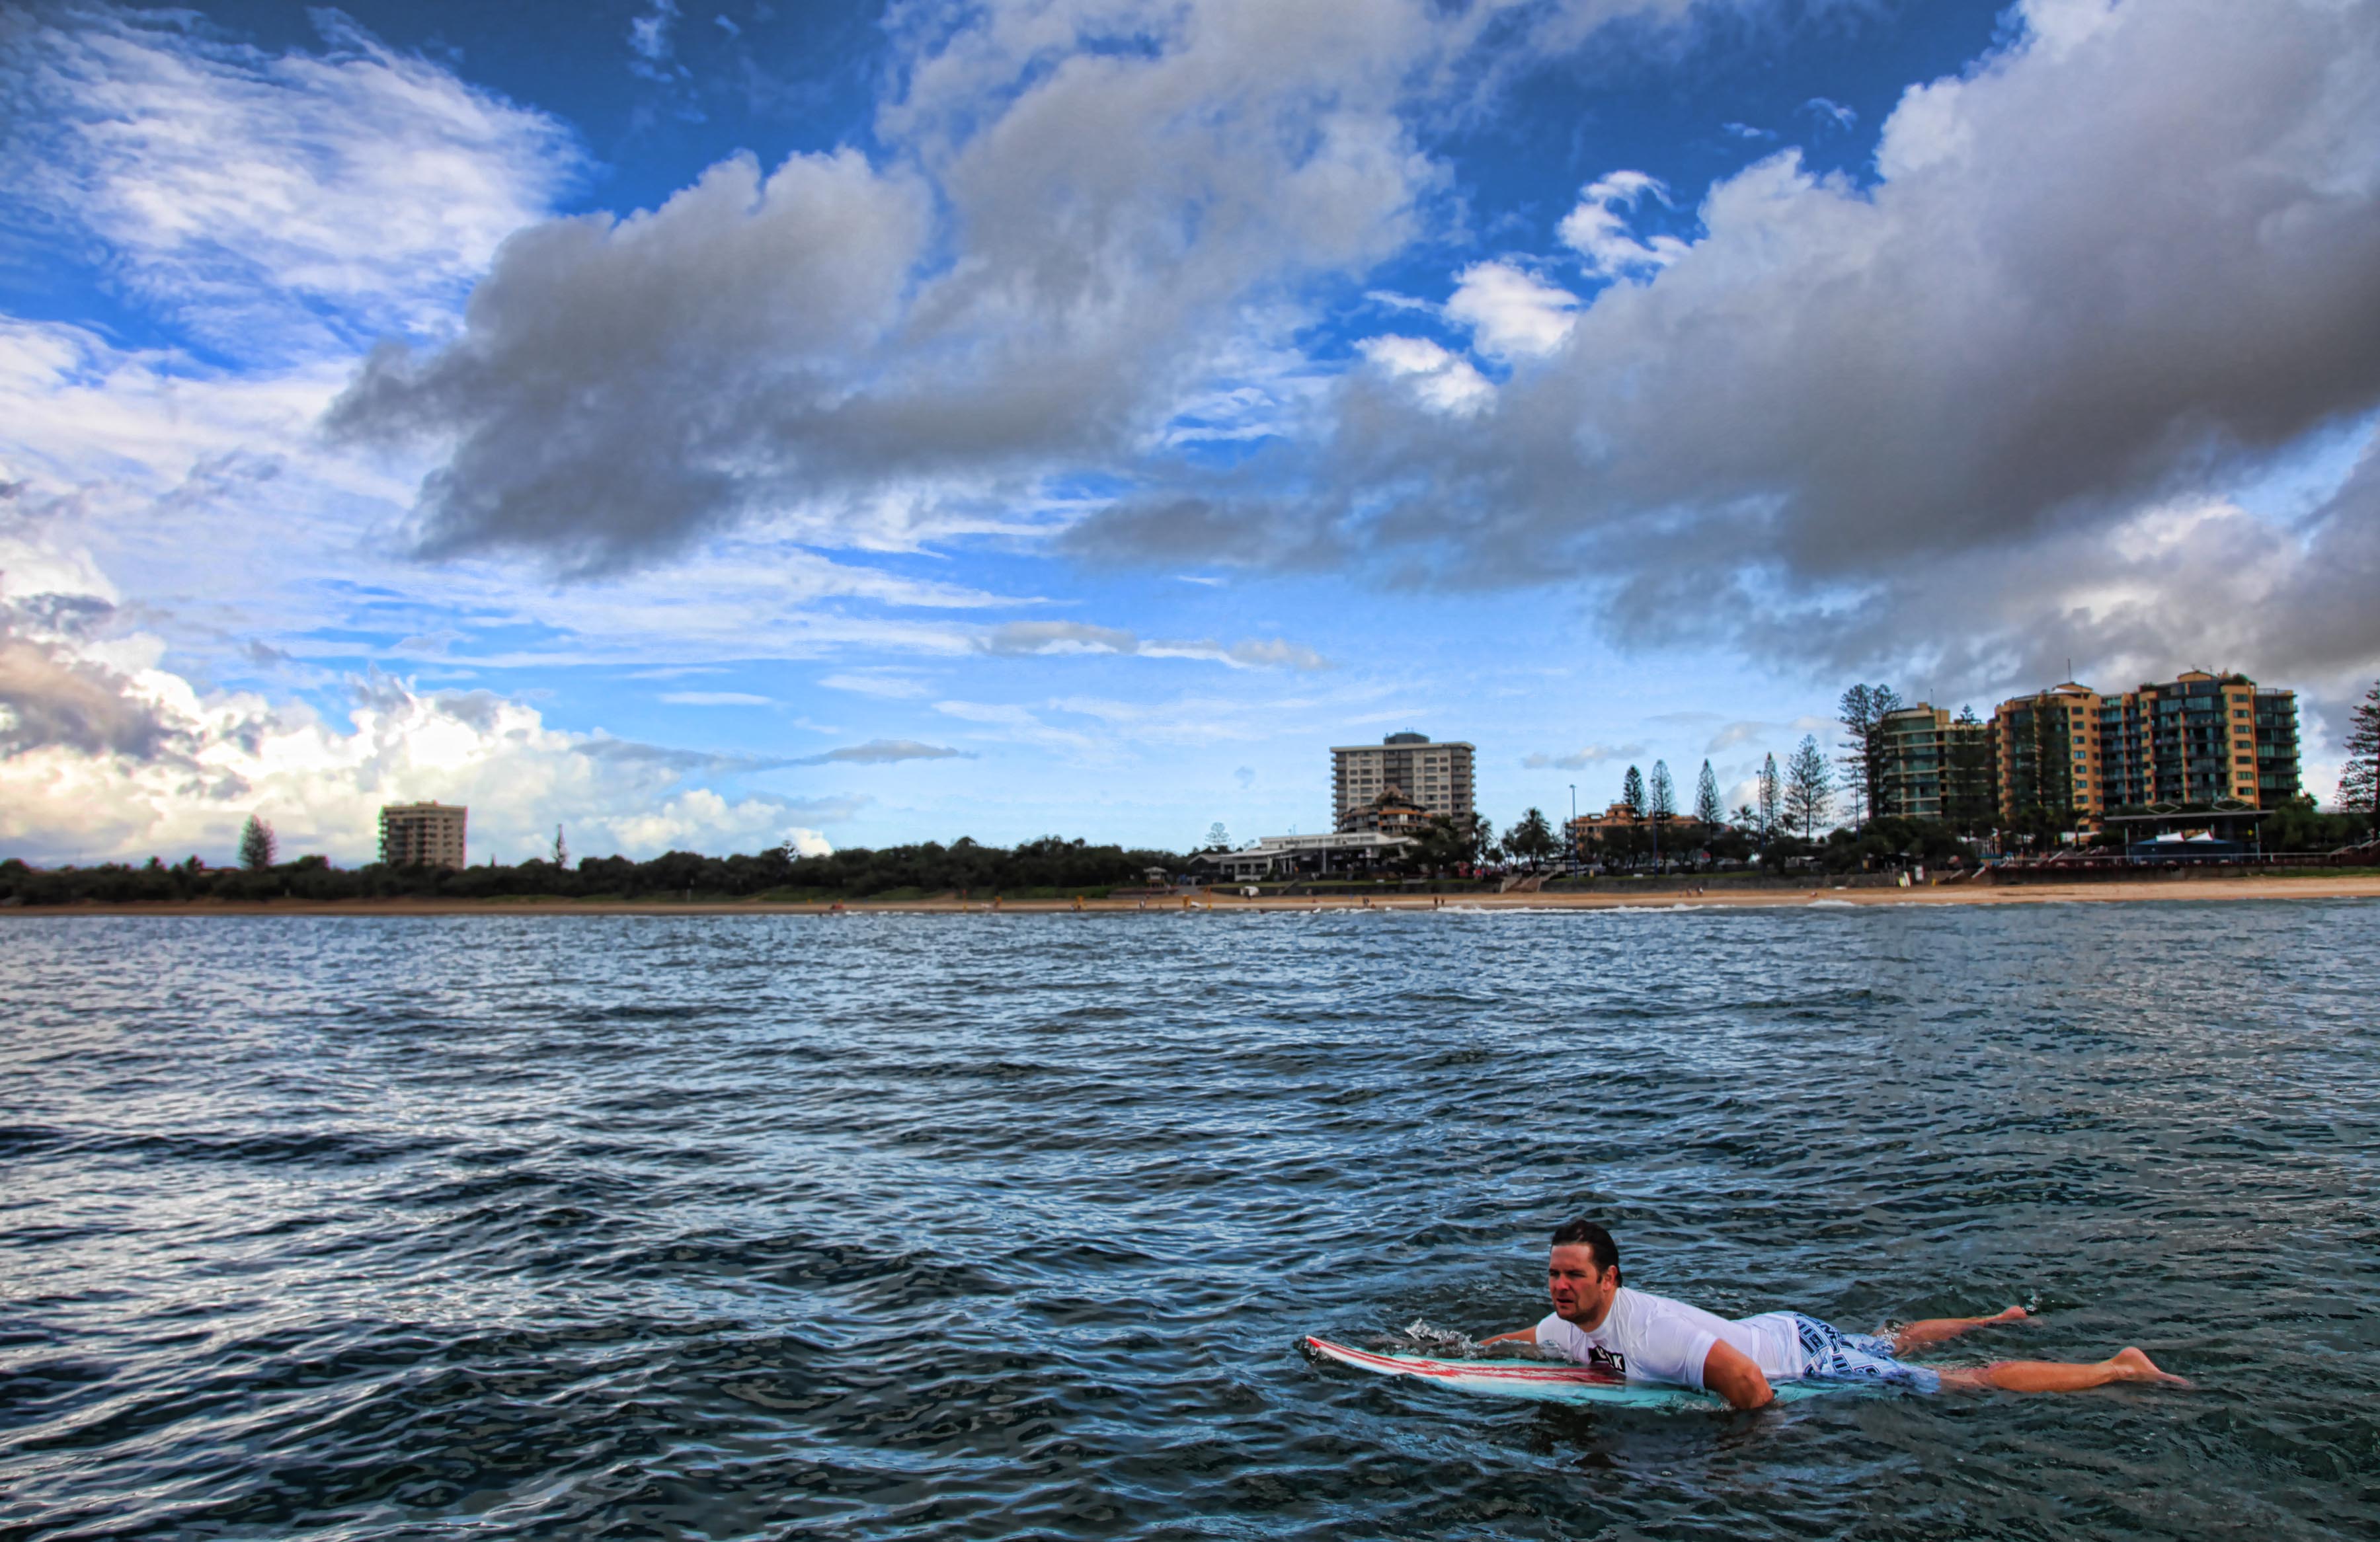 Nick Cooper out at sea of Mooloolaba beach during the shooting of Just Like U.